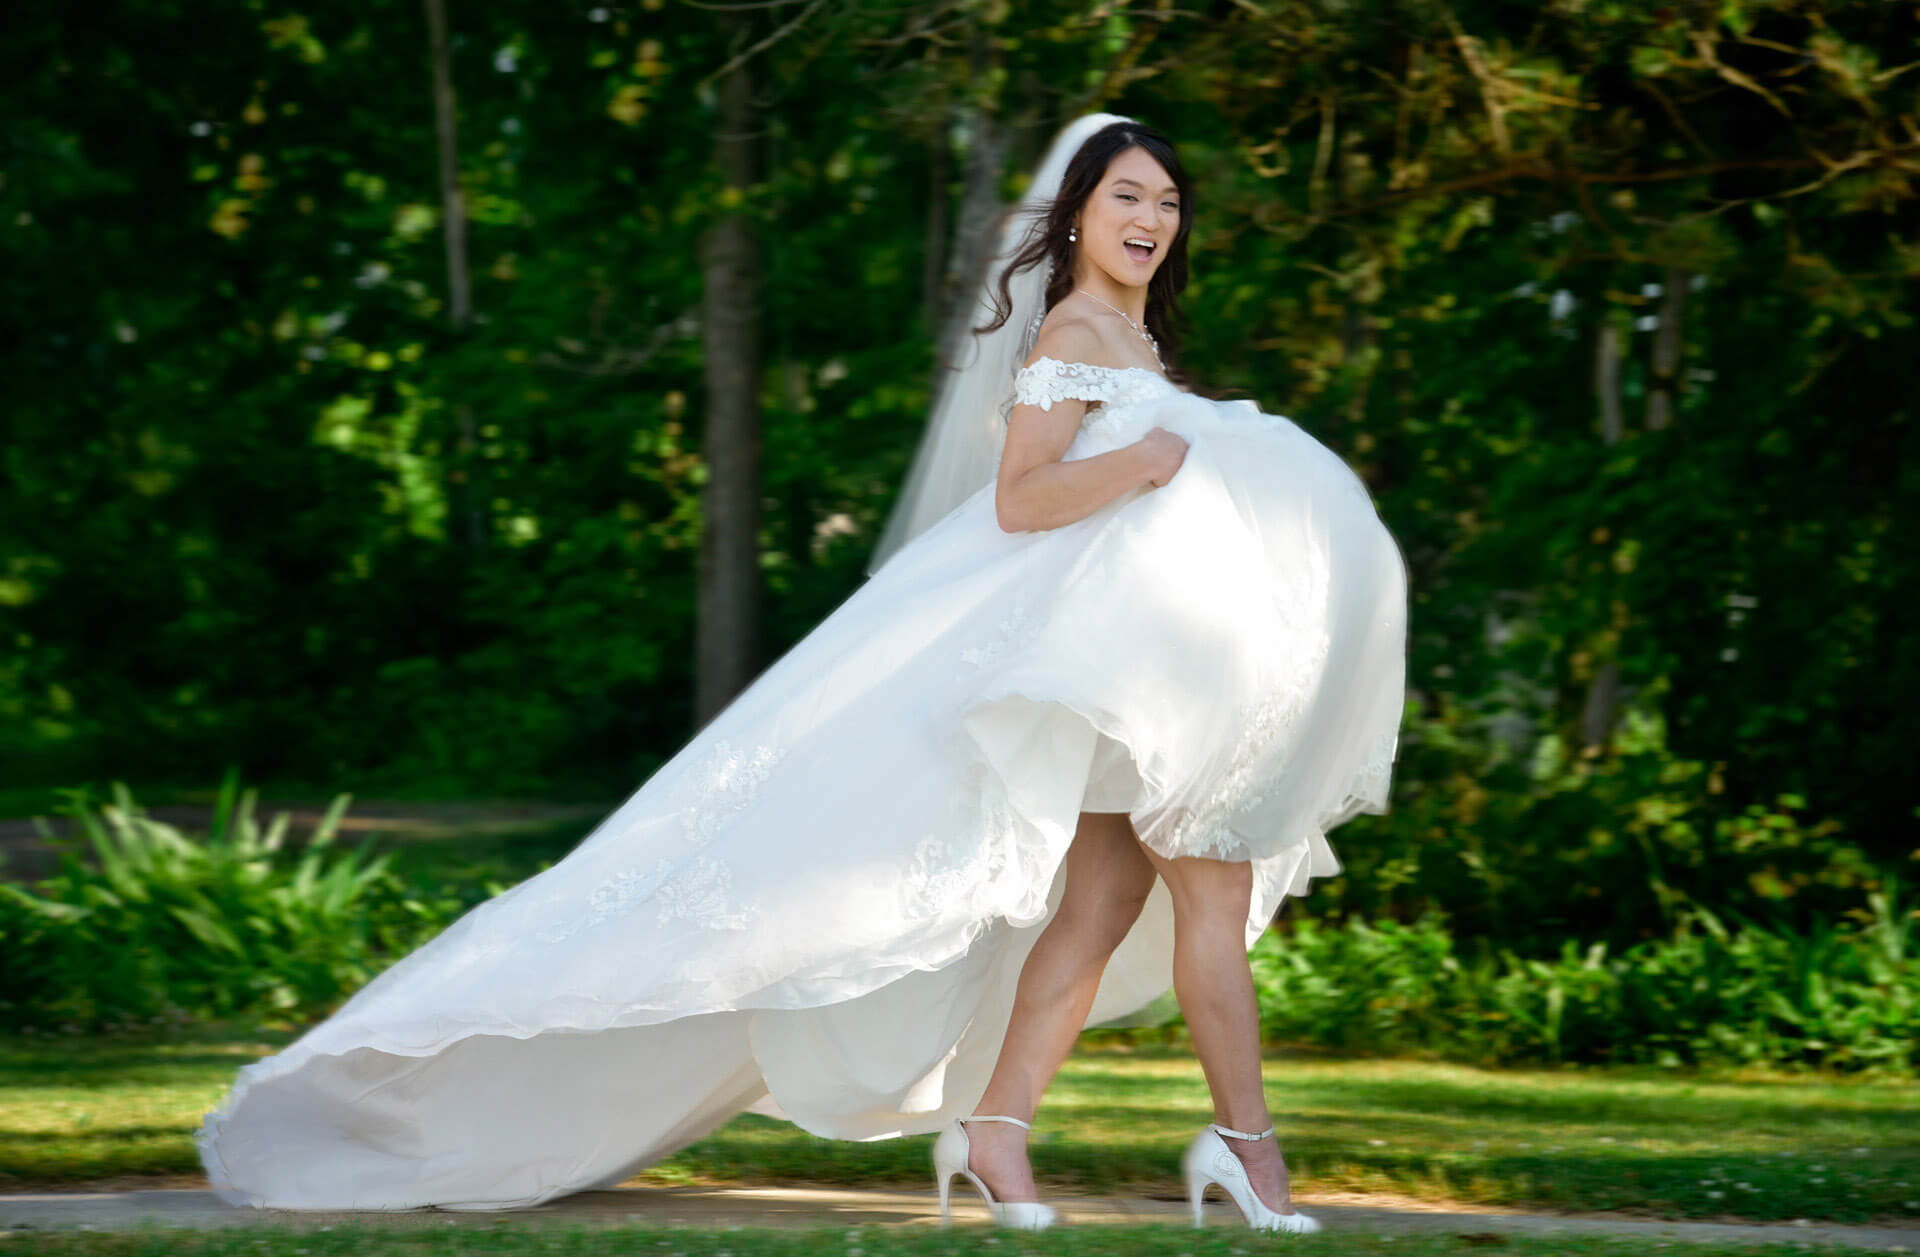 The bride hikes up her wedding dress as she heads out on a hot wedding day at Waldenwoods Resort in Howell, Michigan.